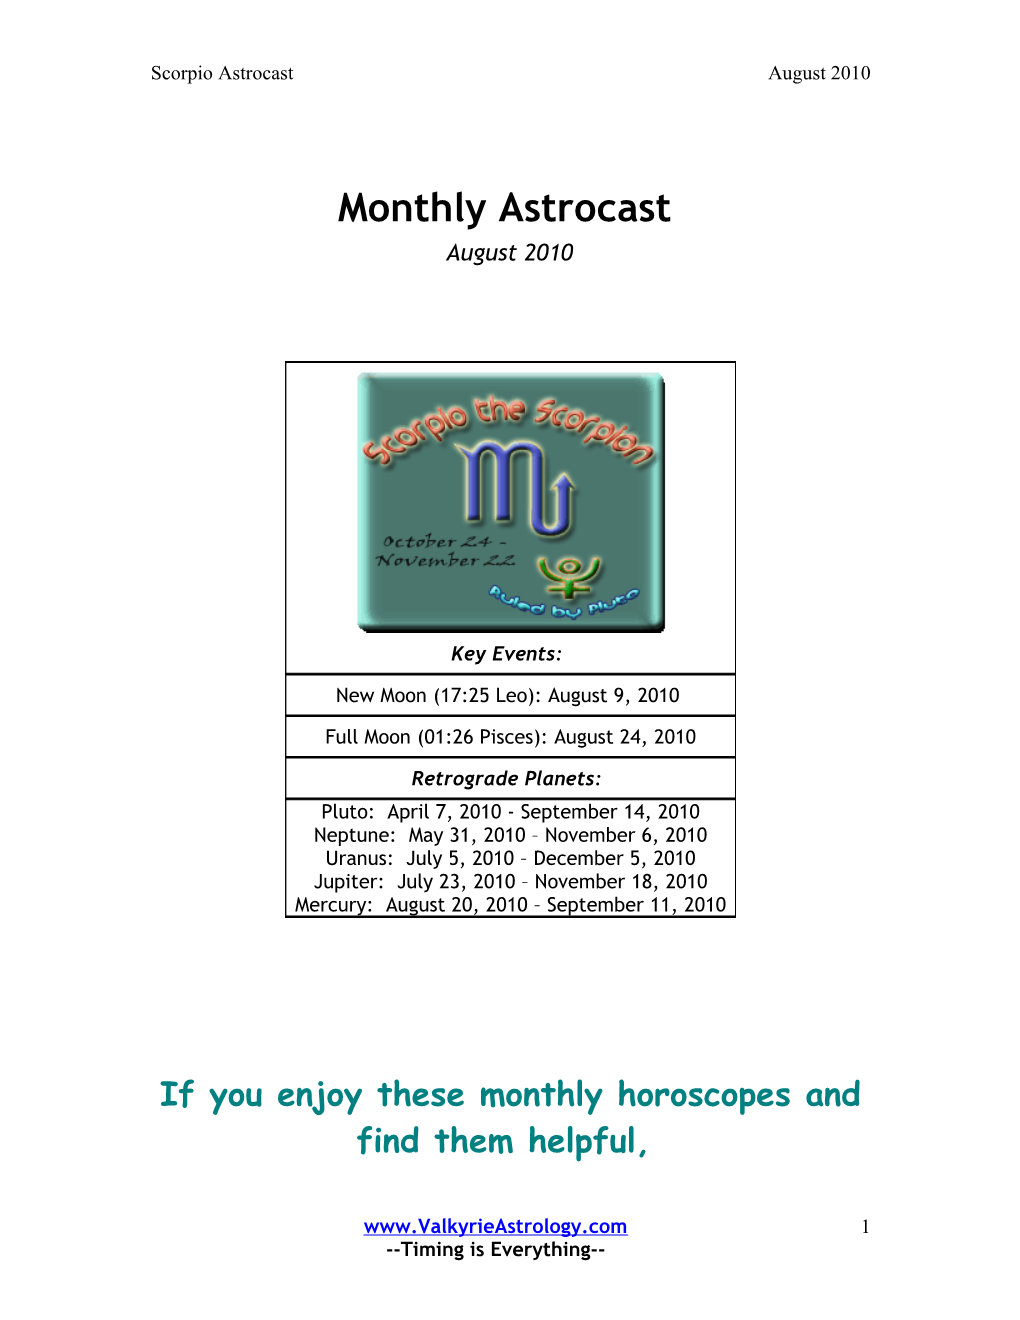 If You Enjoy These Monthly Horoscopes and Find Them Helpful